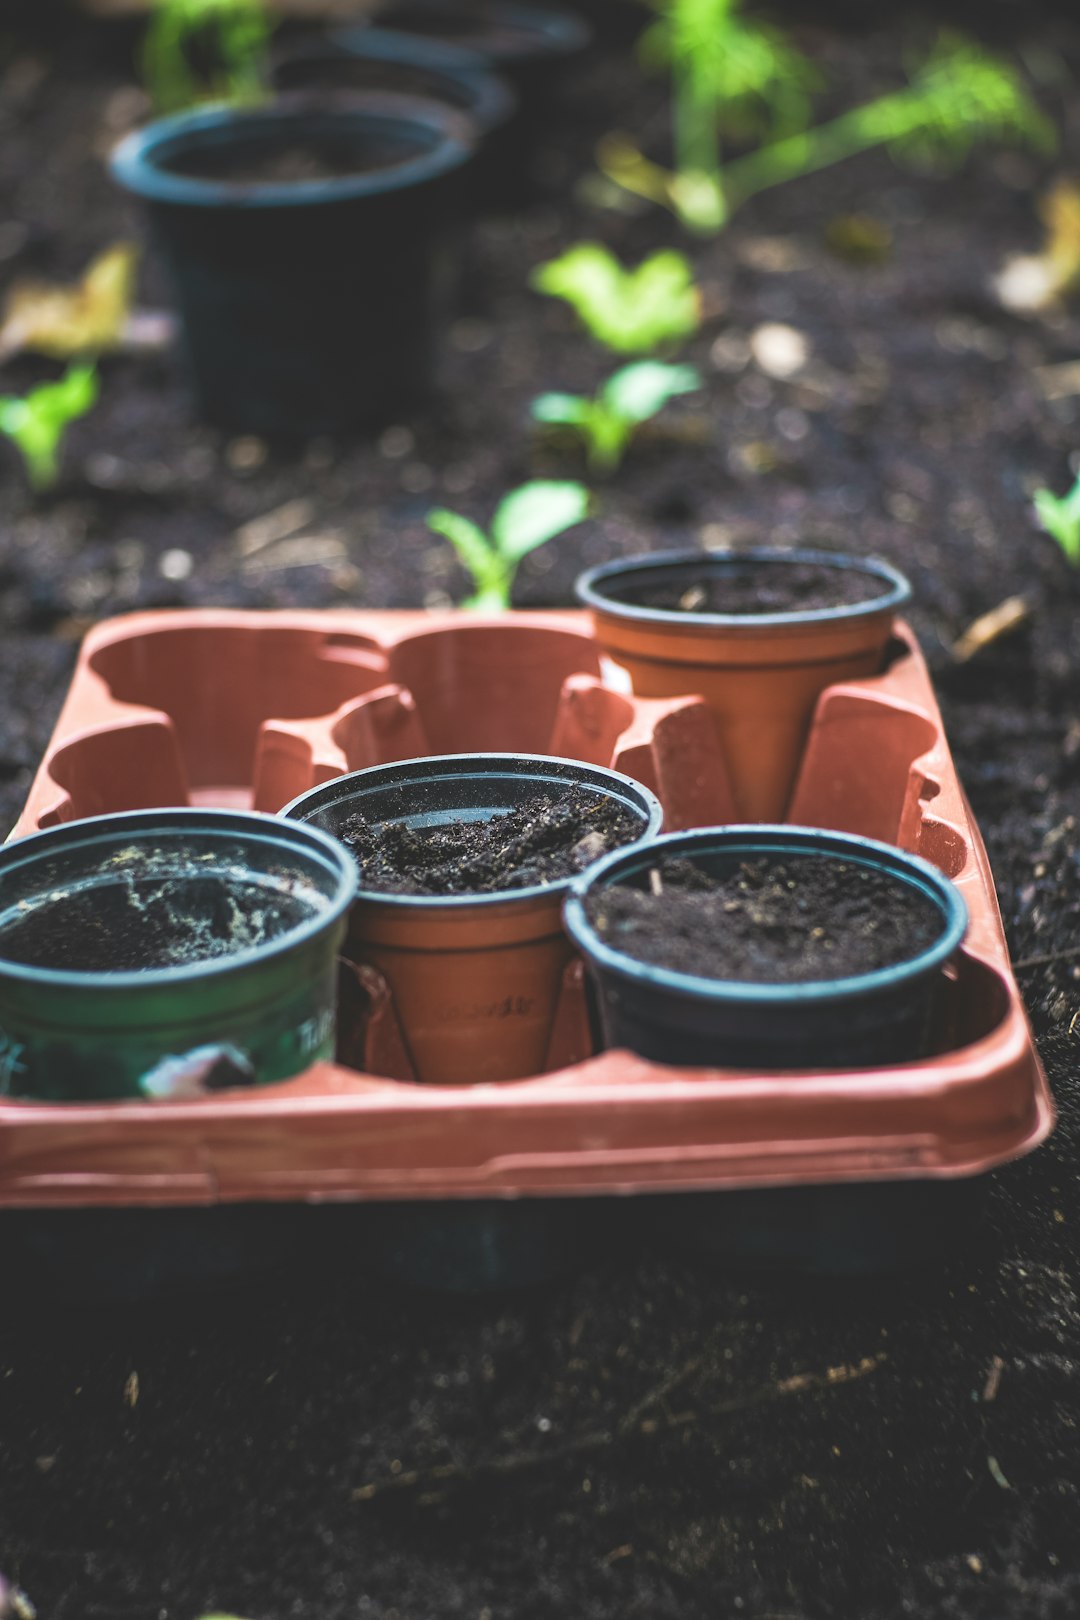 Individual potting pots that will eventually be transplanted outside - How To Grow A Tomato Plant That Bears Tomatoes